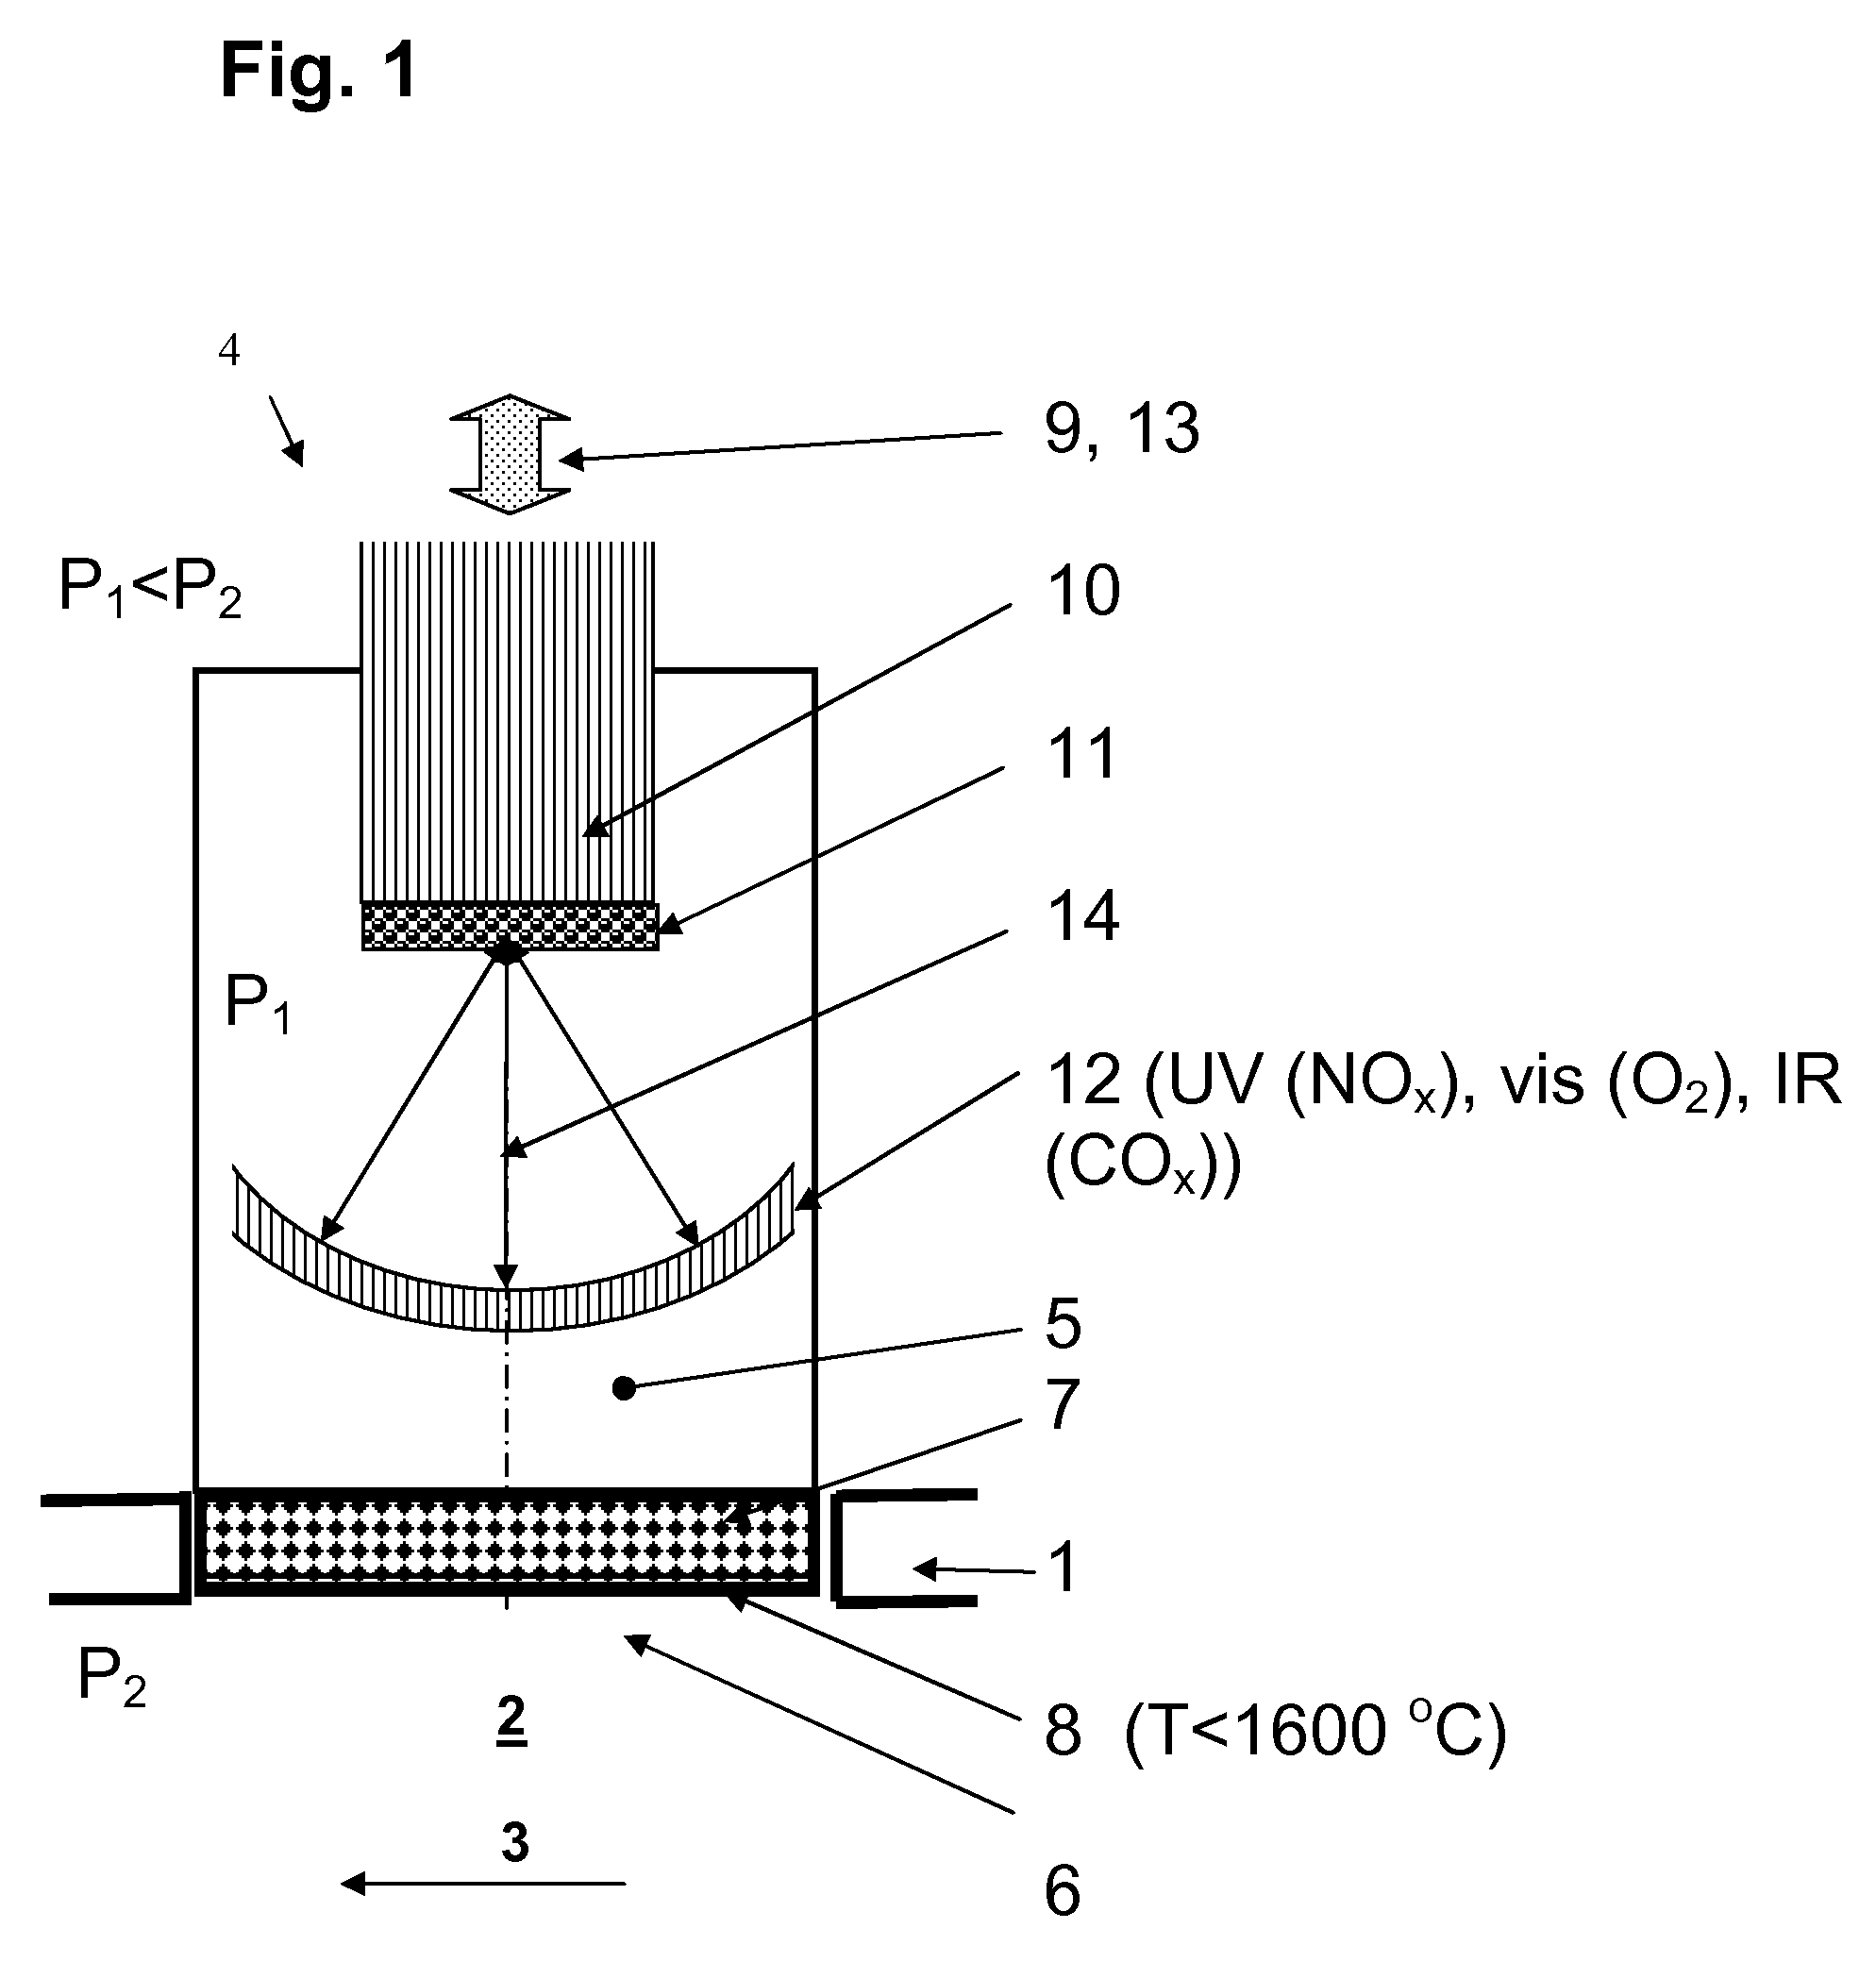 Optical sensor device for local analysis of a combustion process in a combustor of a thermal power plant